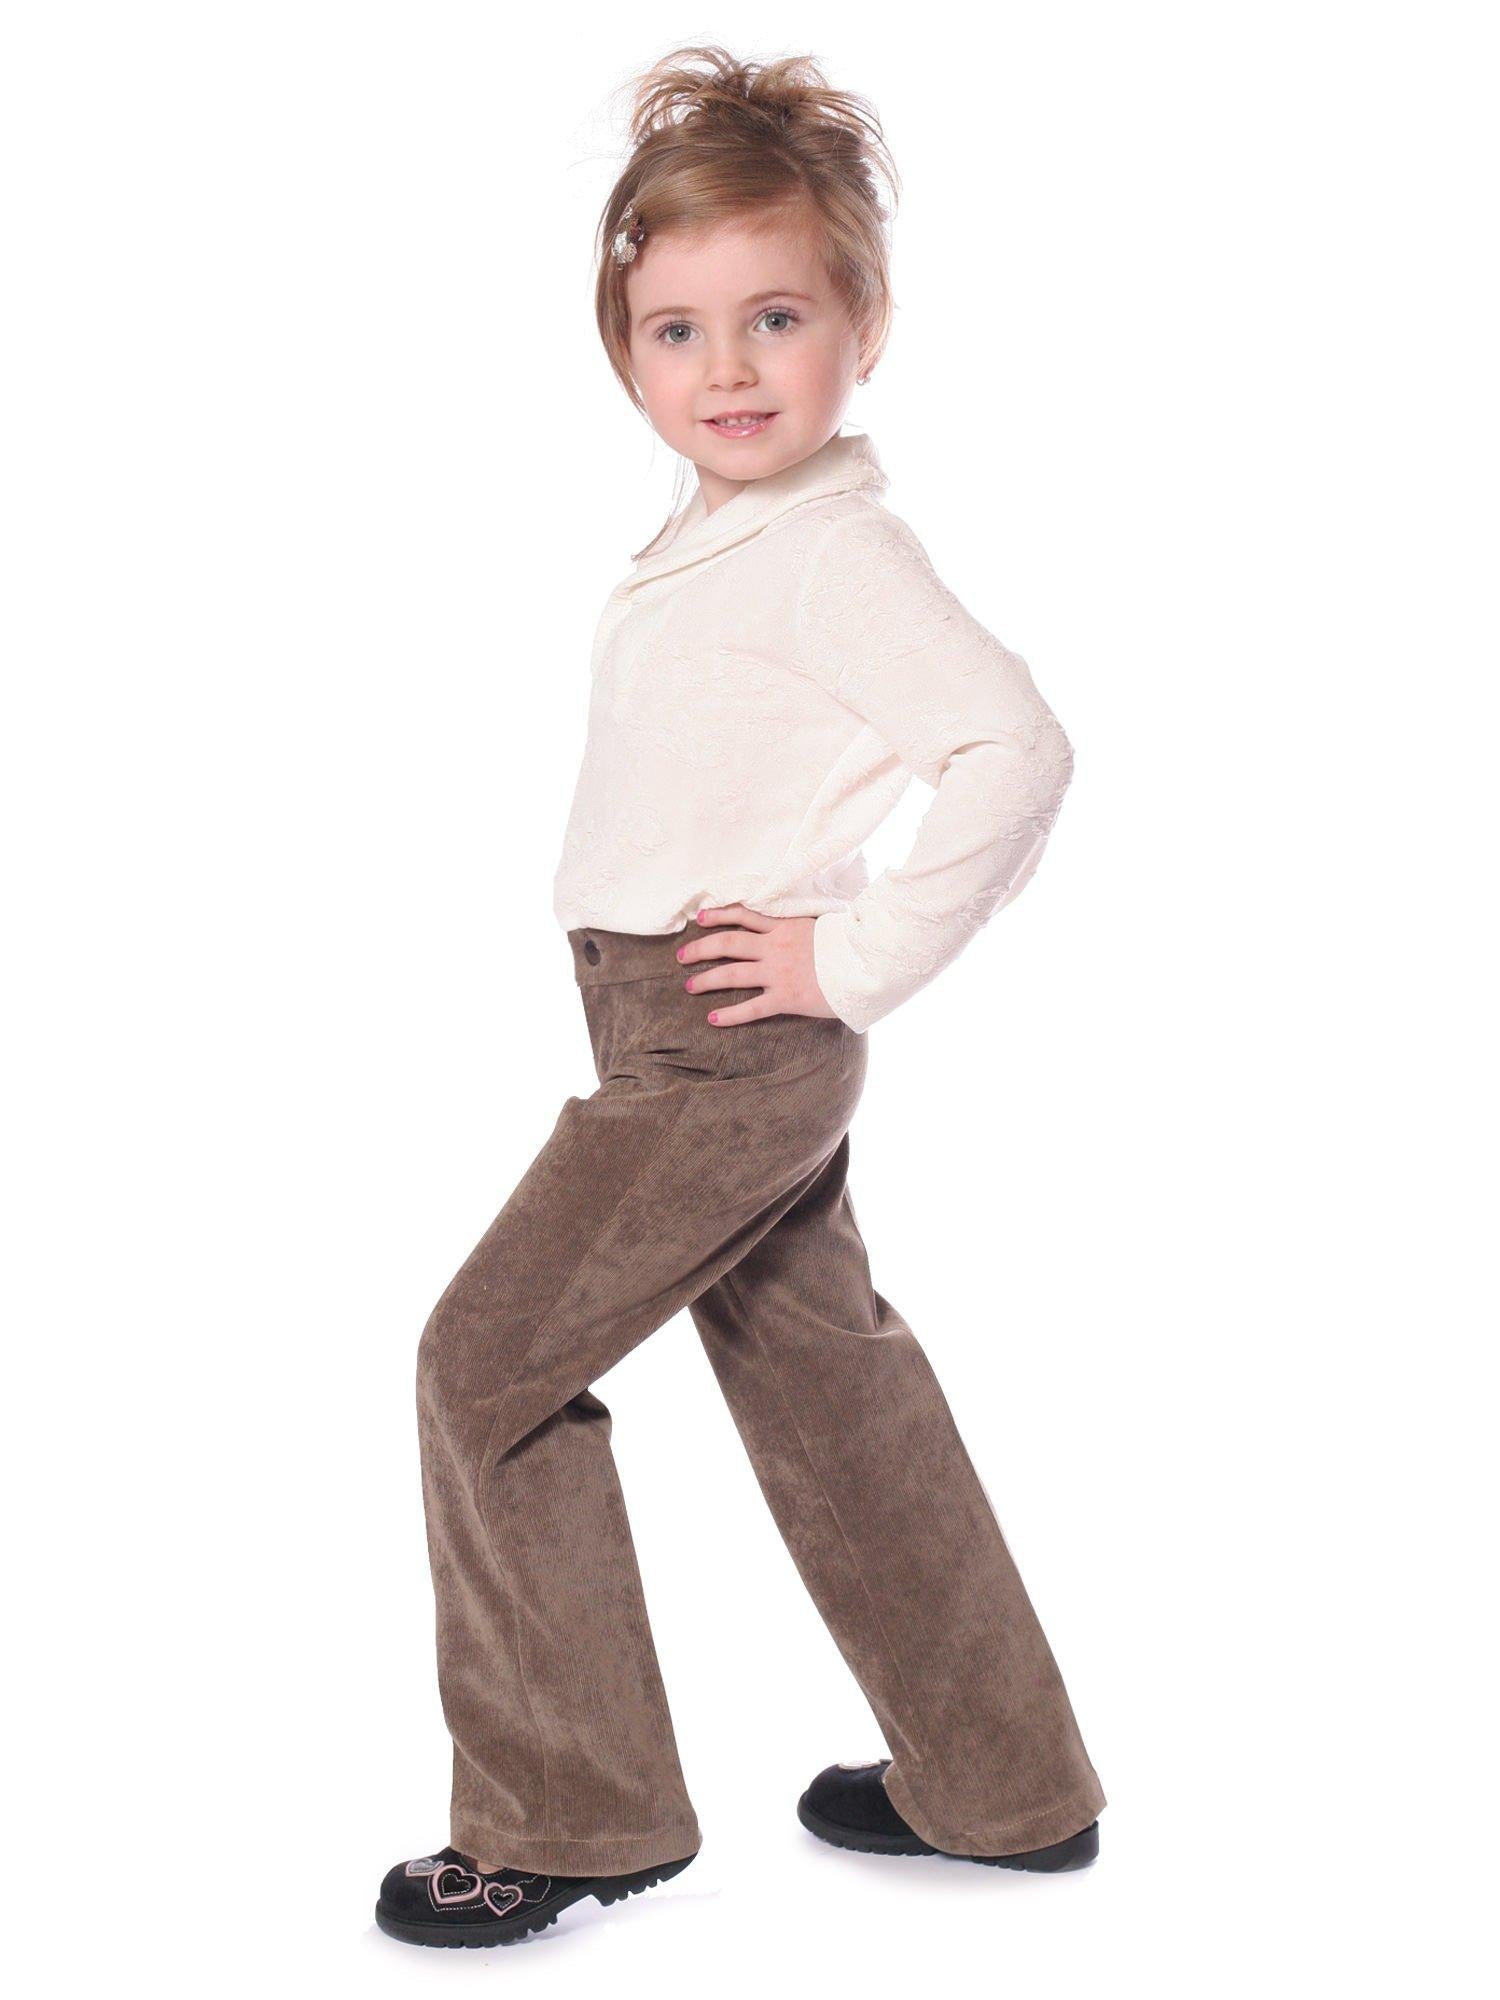 Jalie 2909 - Classic Trousers Pattern for Girls